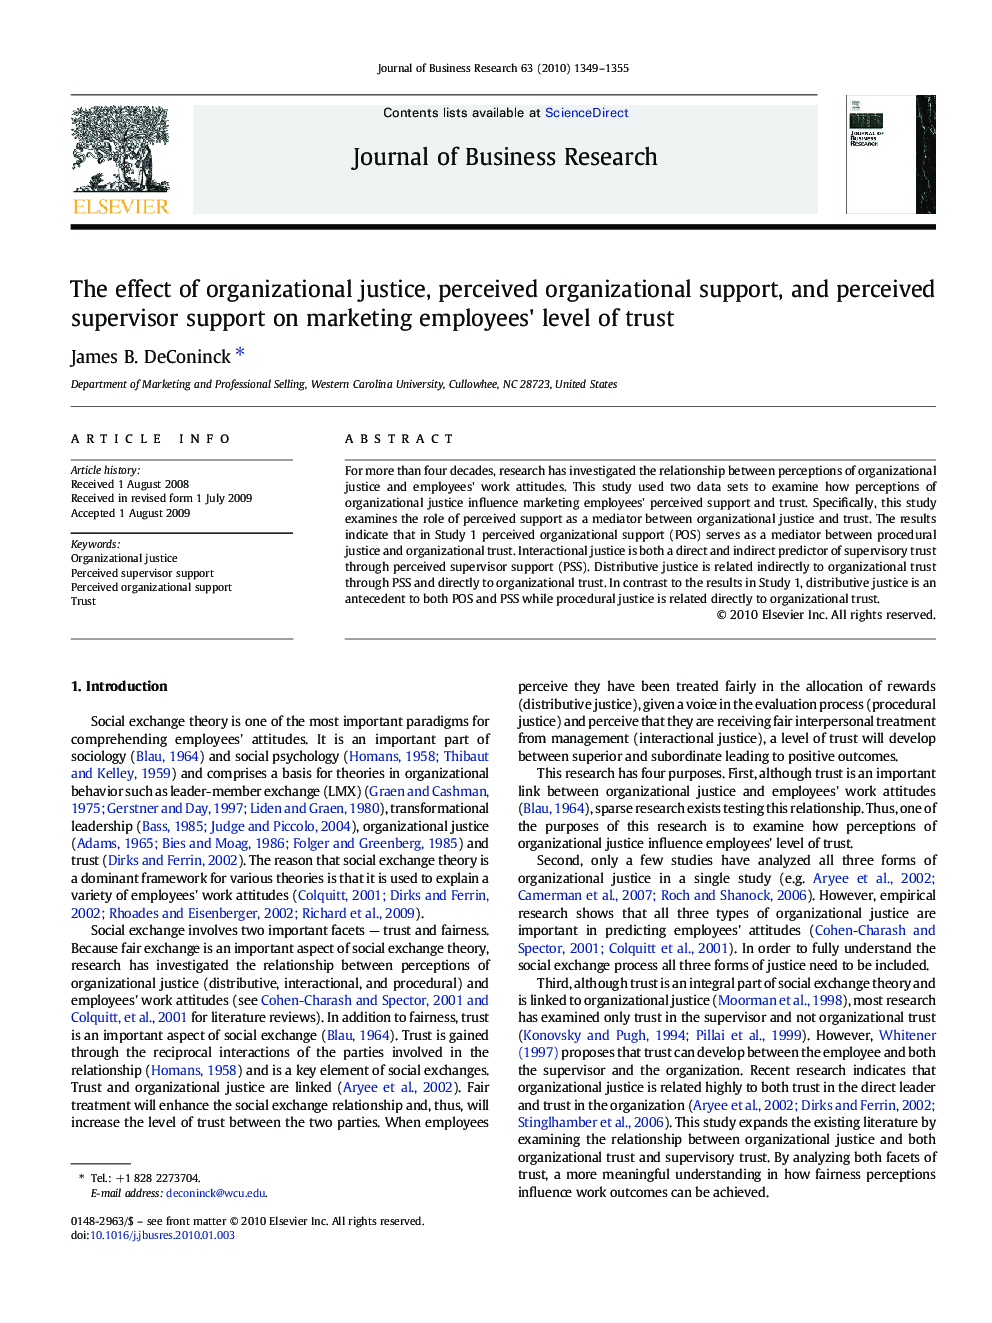 The effect of organizational justice, perceived organizational support, and perceived supervisor support on marketing employees' level of trust